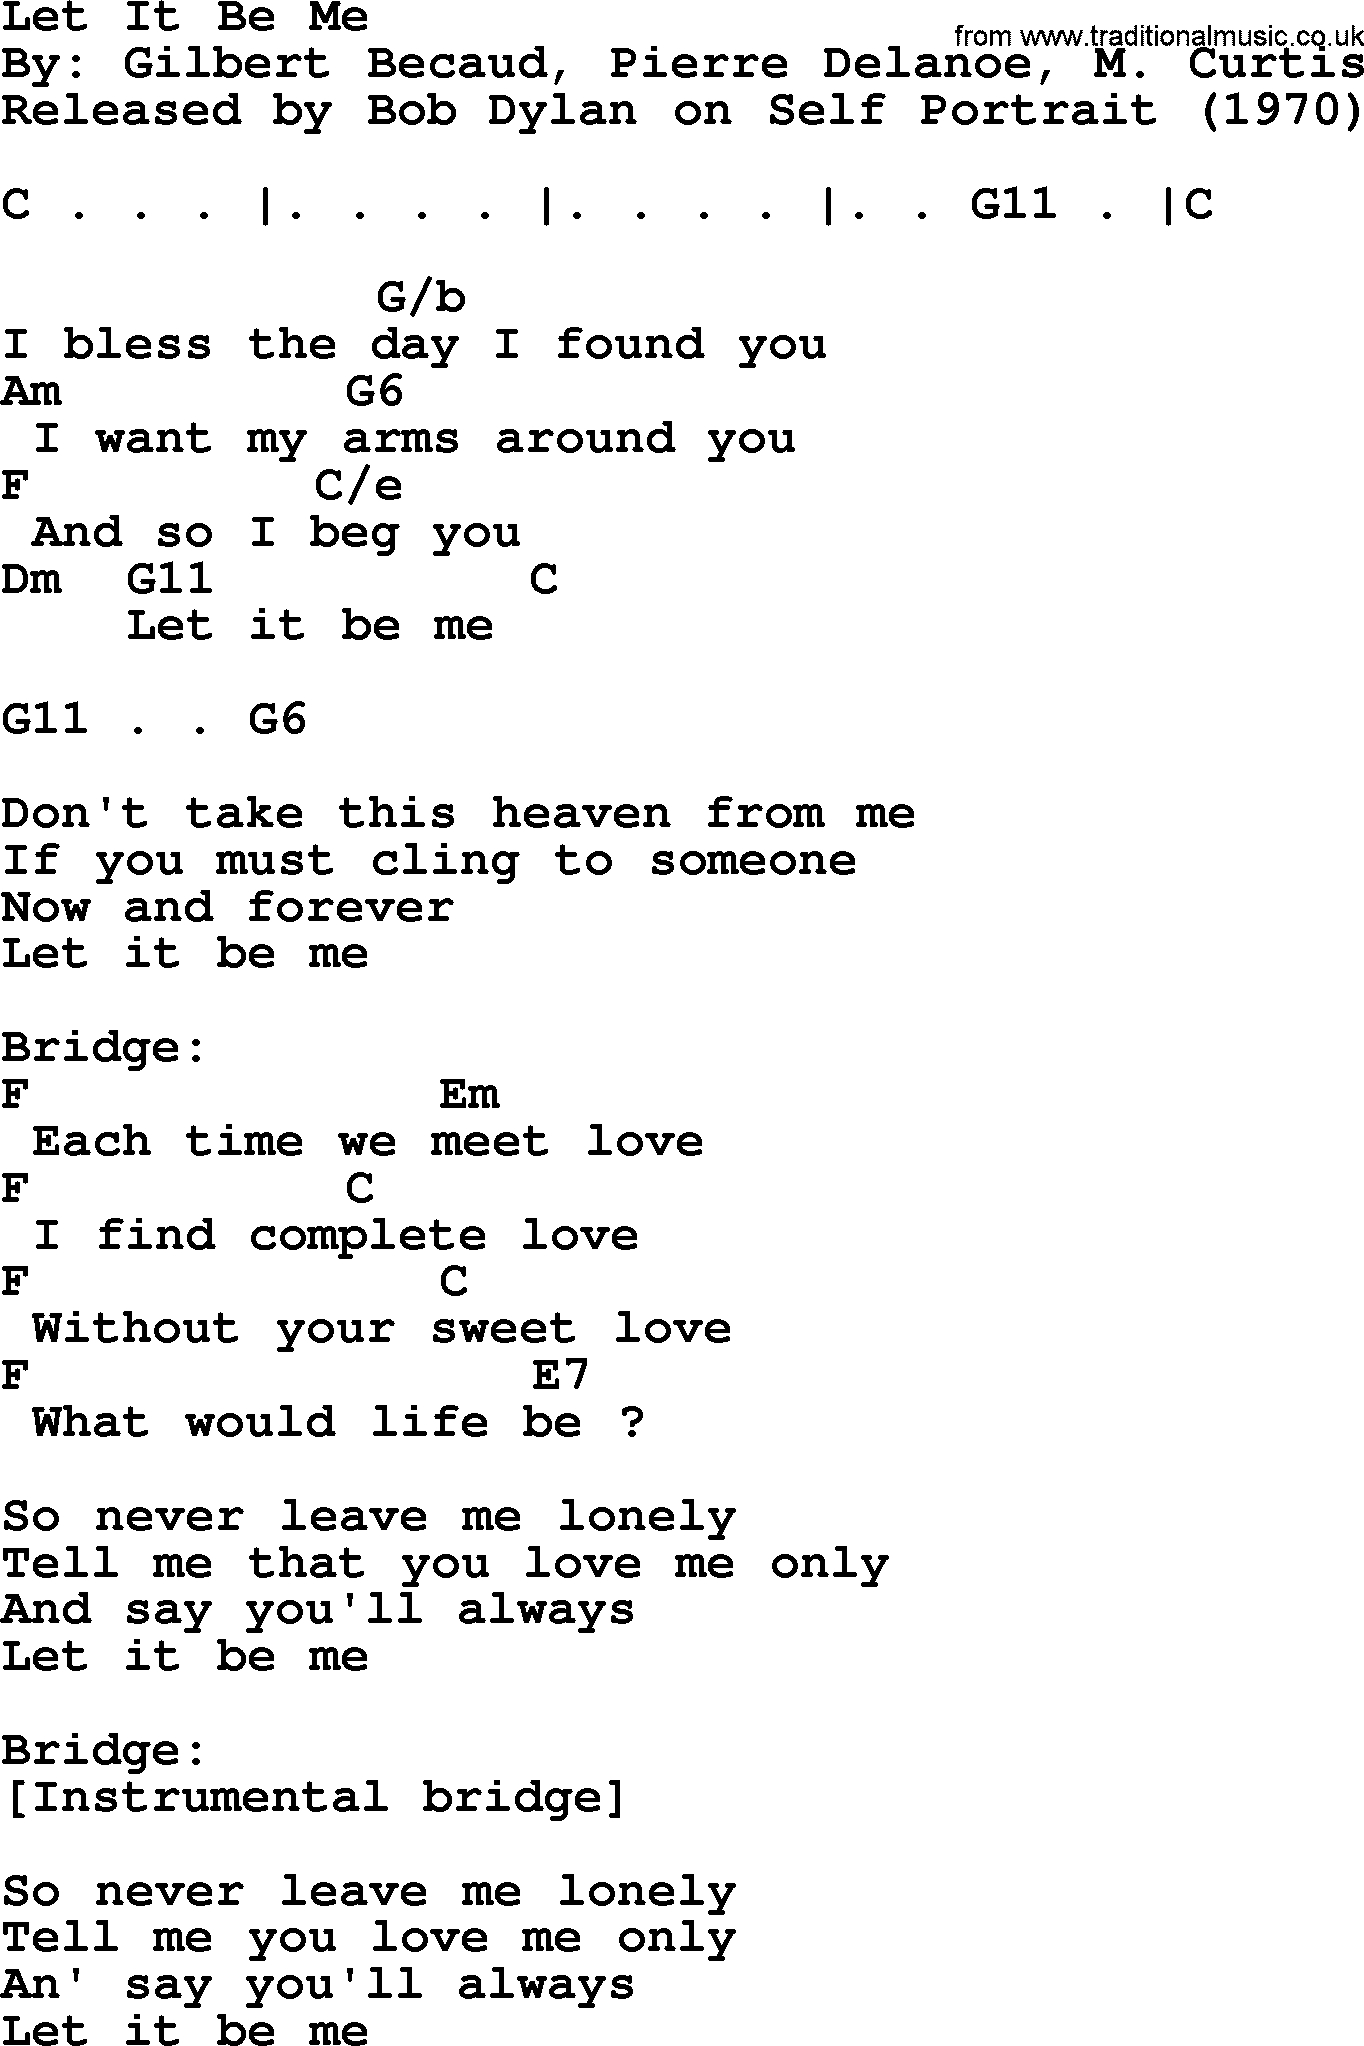 Let It Be Chords Bob Dylan Song Let It Be Me Lyrics And Chords